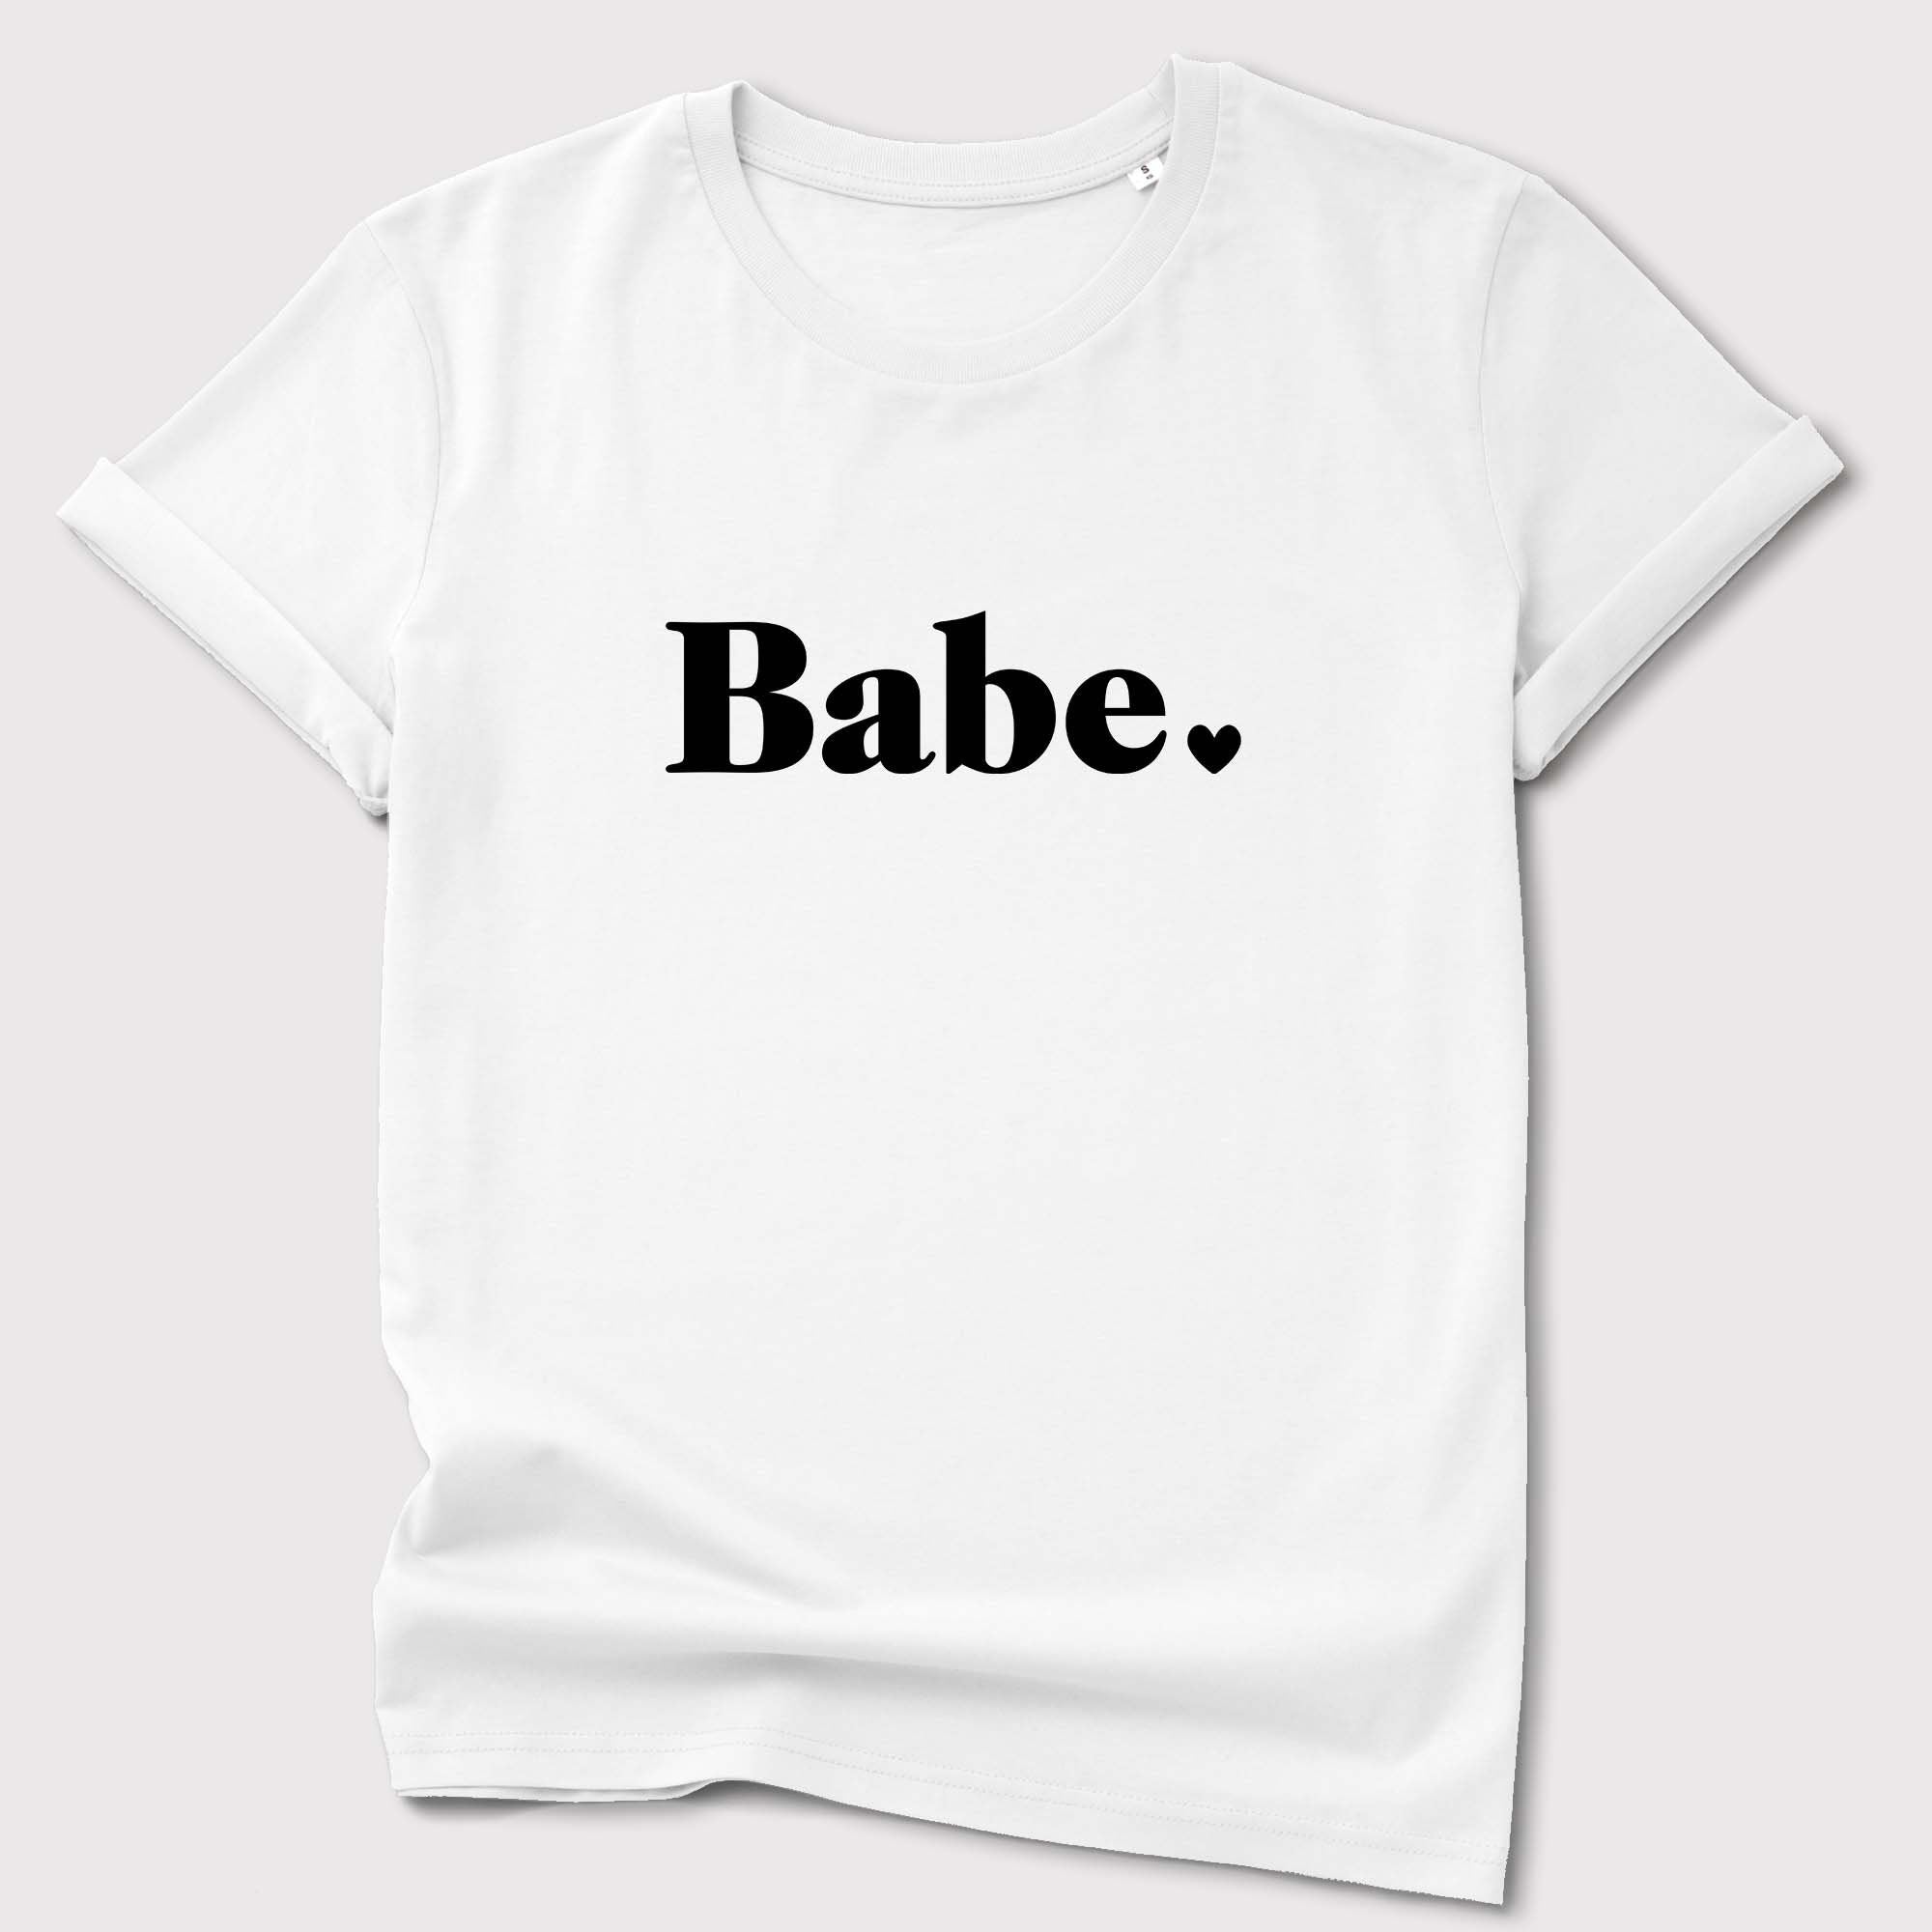 Bride and Babe Hen Party Tops, Bridesmaid T-Shirts, Hen Night Tops, Hen Party Tops, Personalised Wedding Gifts,